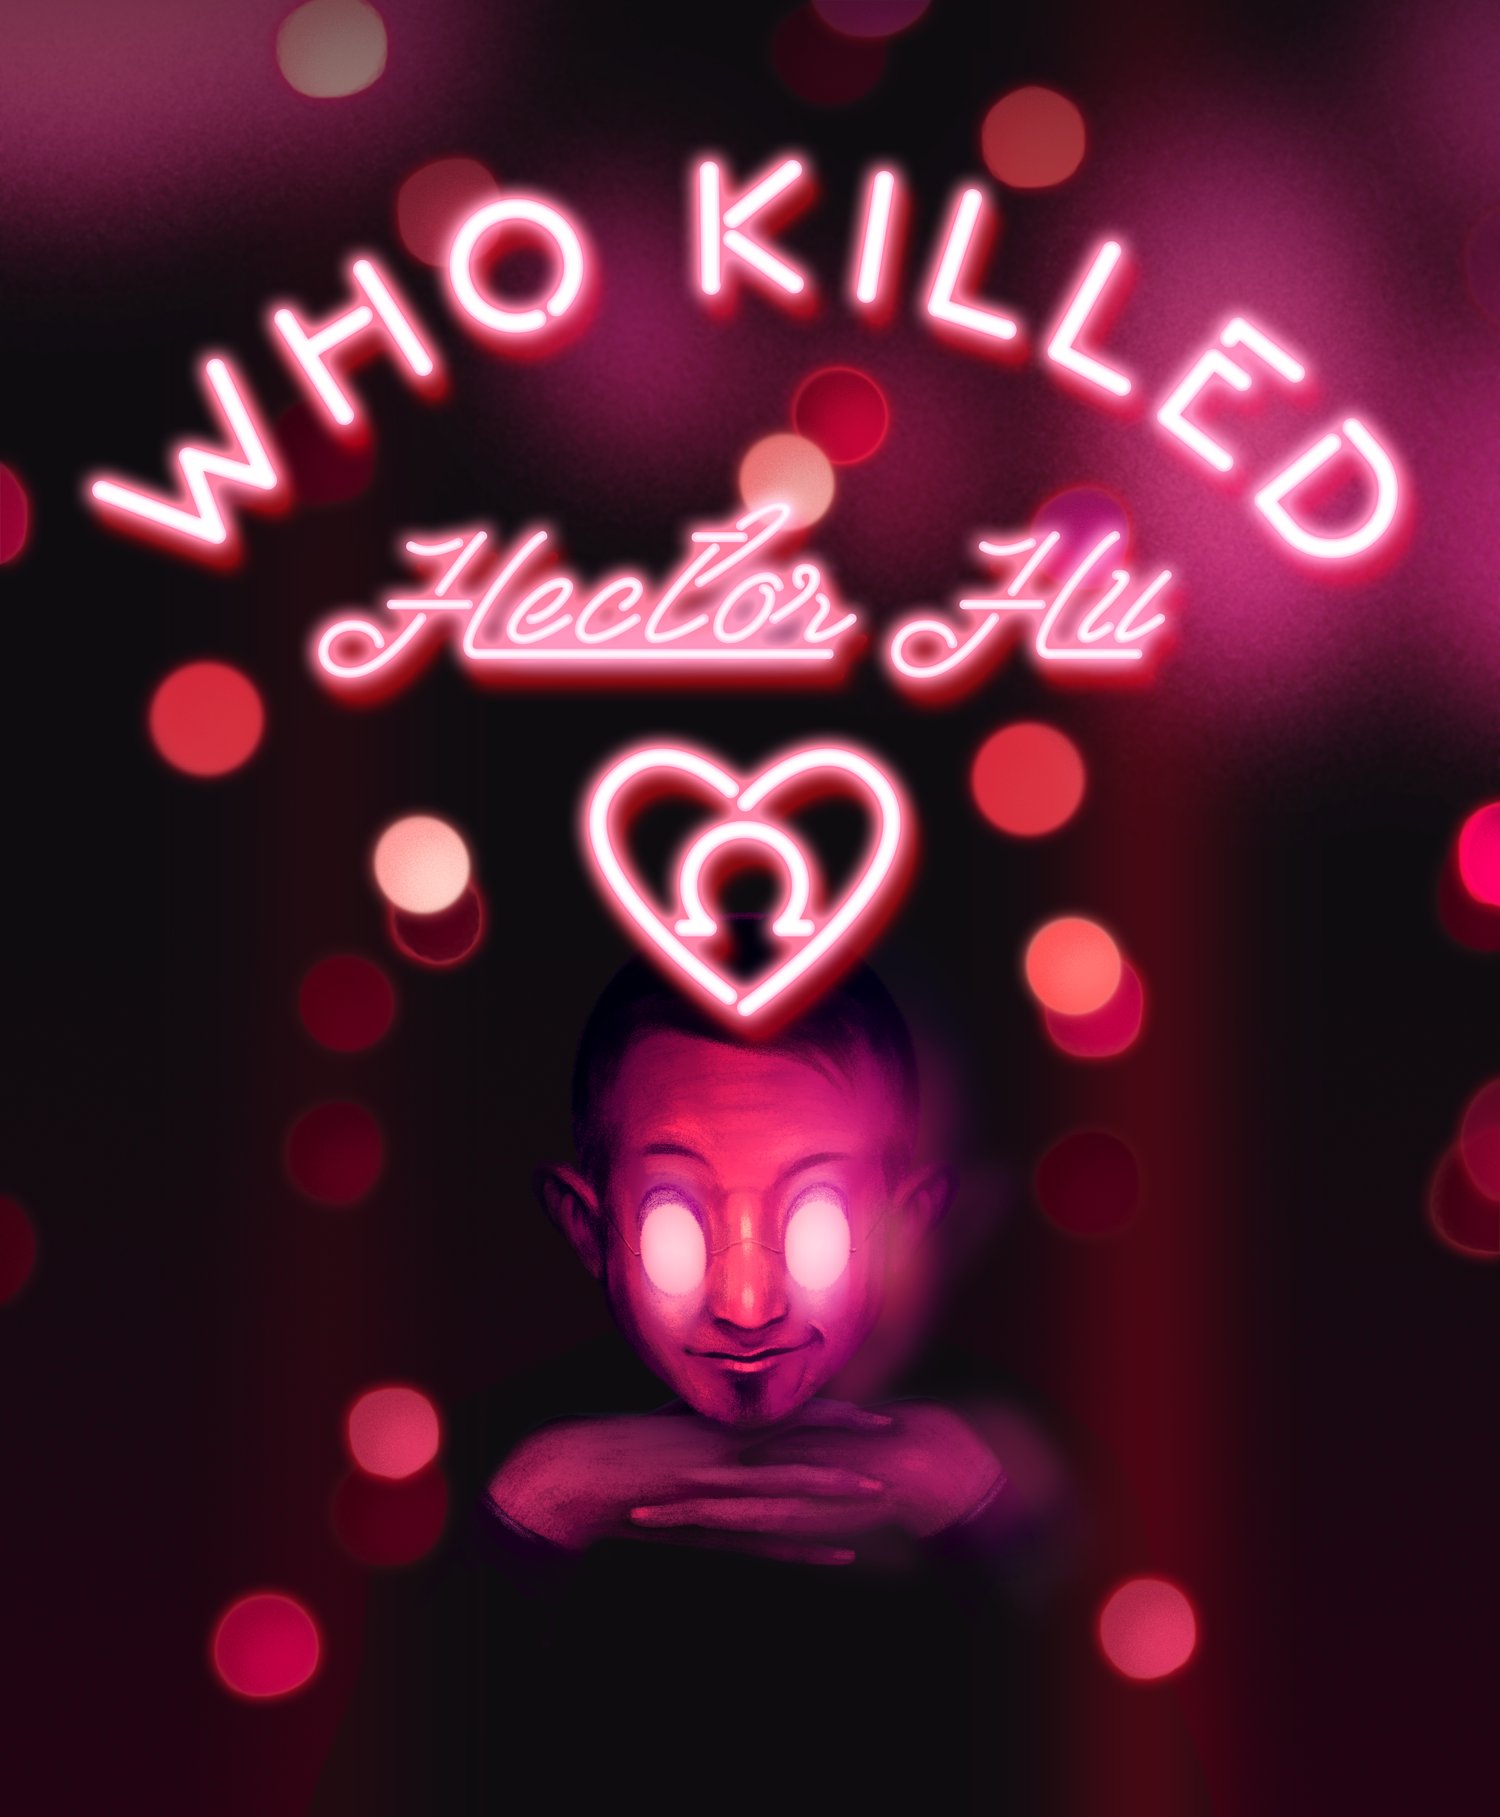 Hector Hu leans on his hands under the neon signage, "Who killed Hector Hu?" and an omega symbol inside a heart.